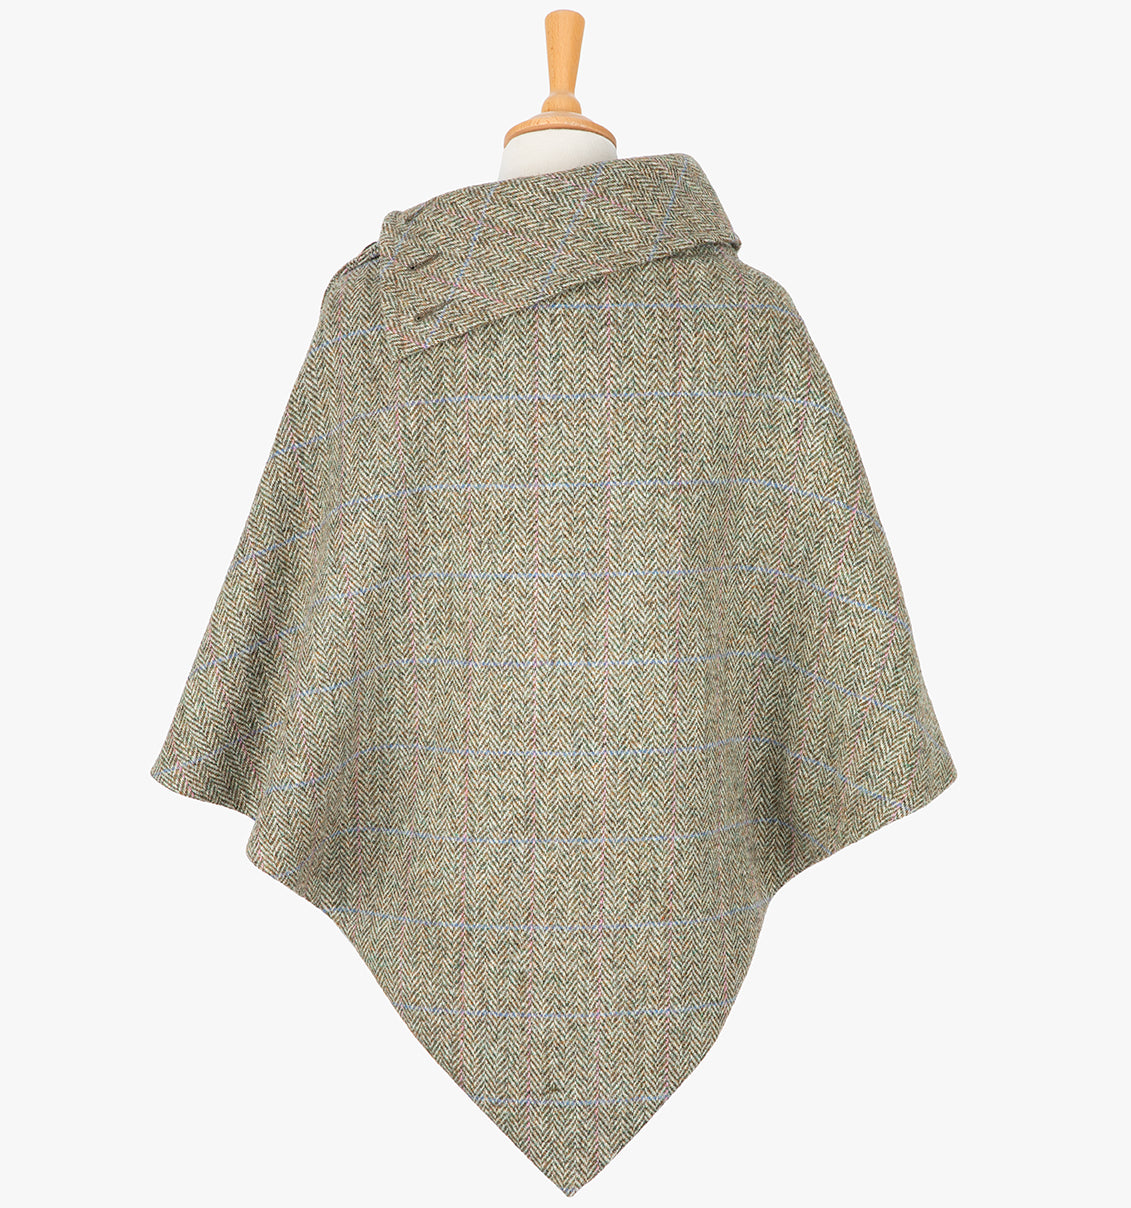 Rear view of the Pastel check poncho, this drops over the head and drapes gently over the shoulders. It comes mid-way down the arms and finishes at a point at the back. The colour is a neutral brown with a blue and pink overrcheck. It has a folded collar with 3 button holes on the left.